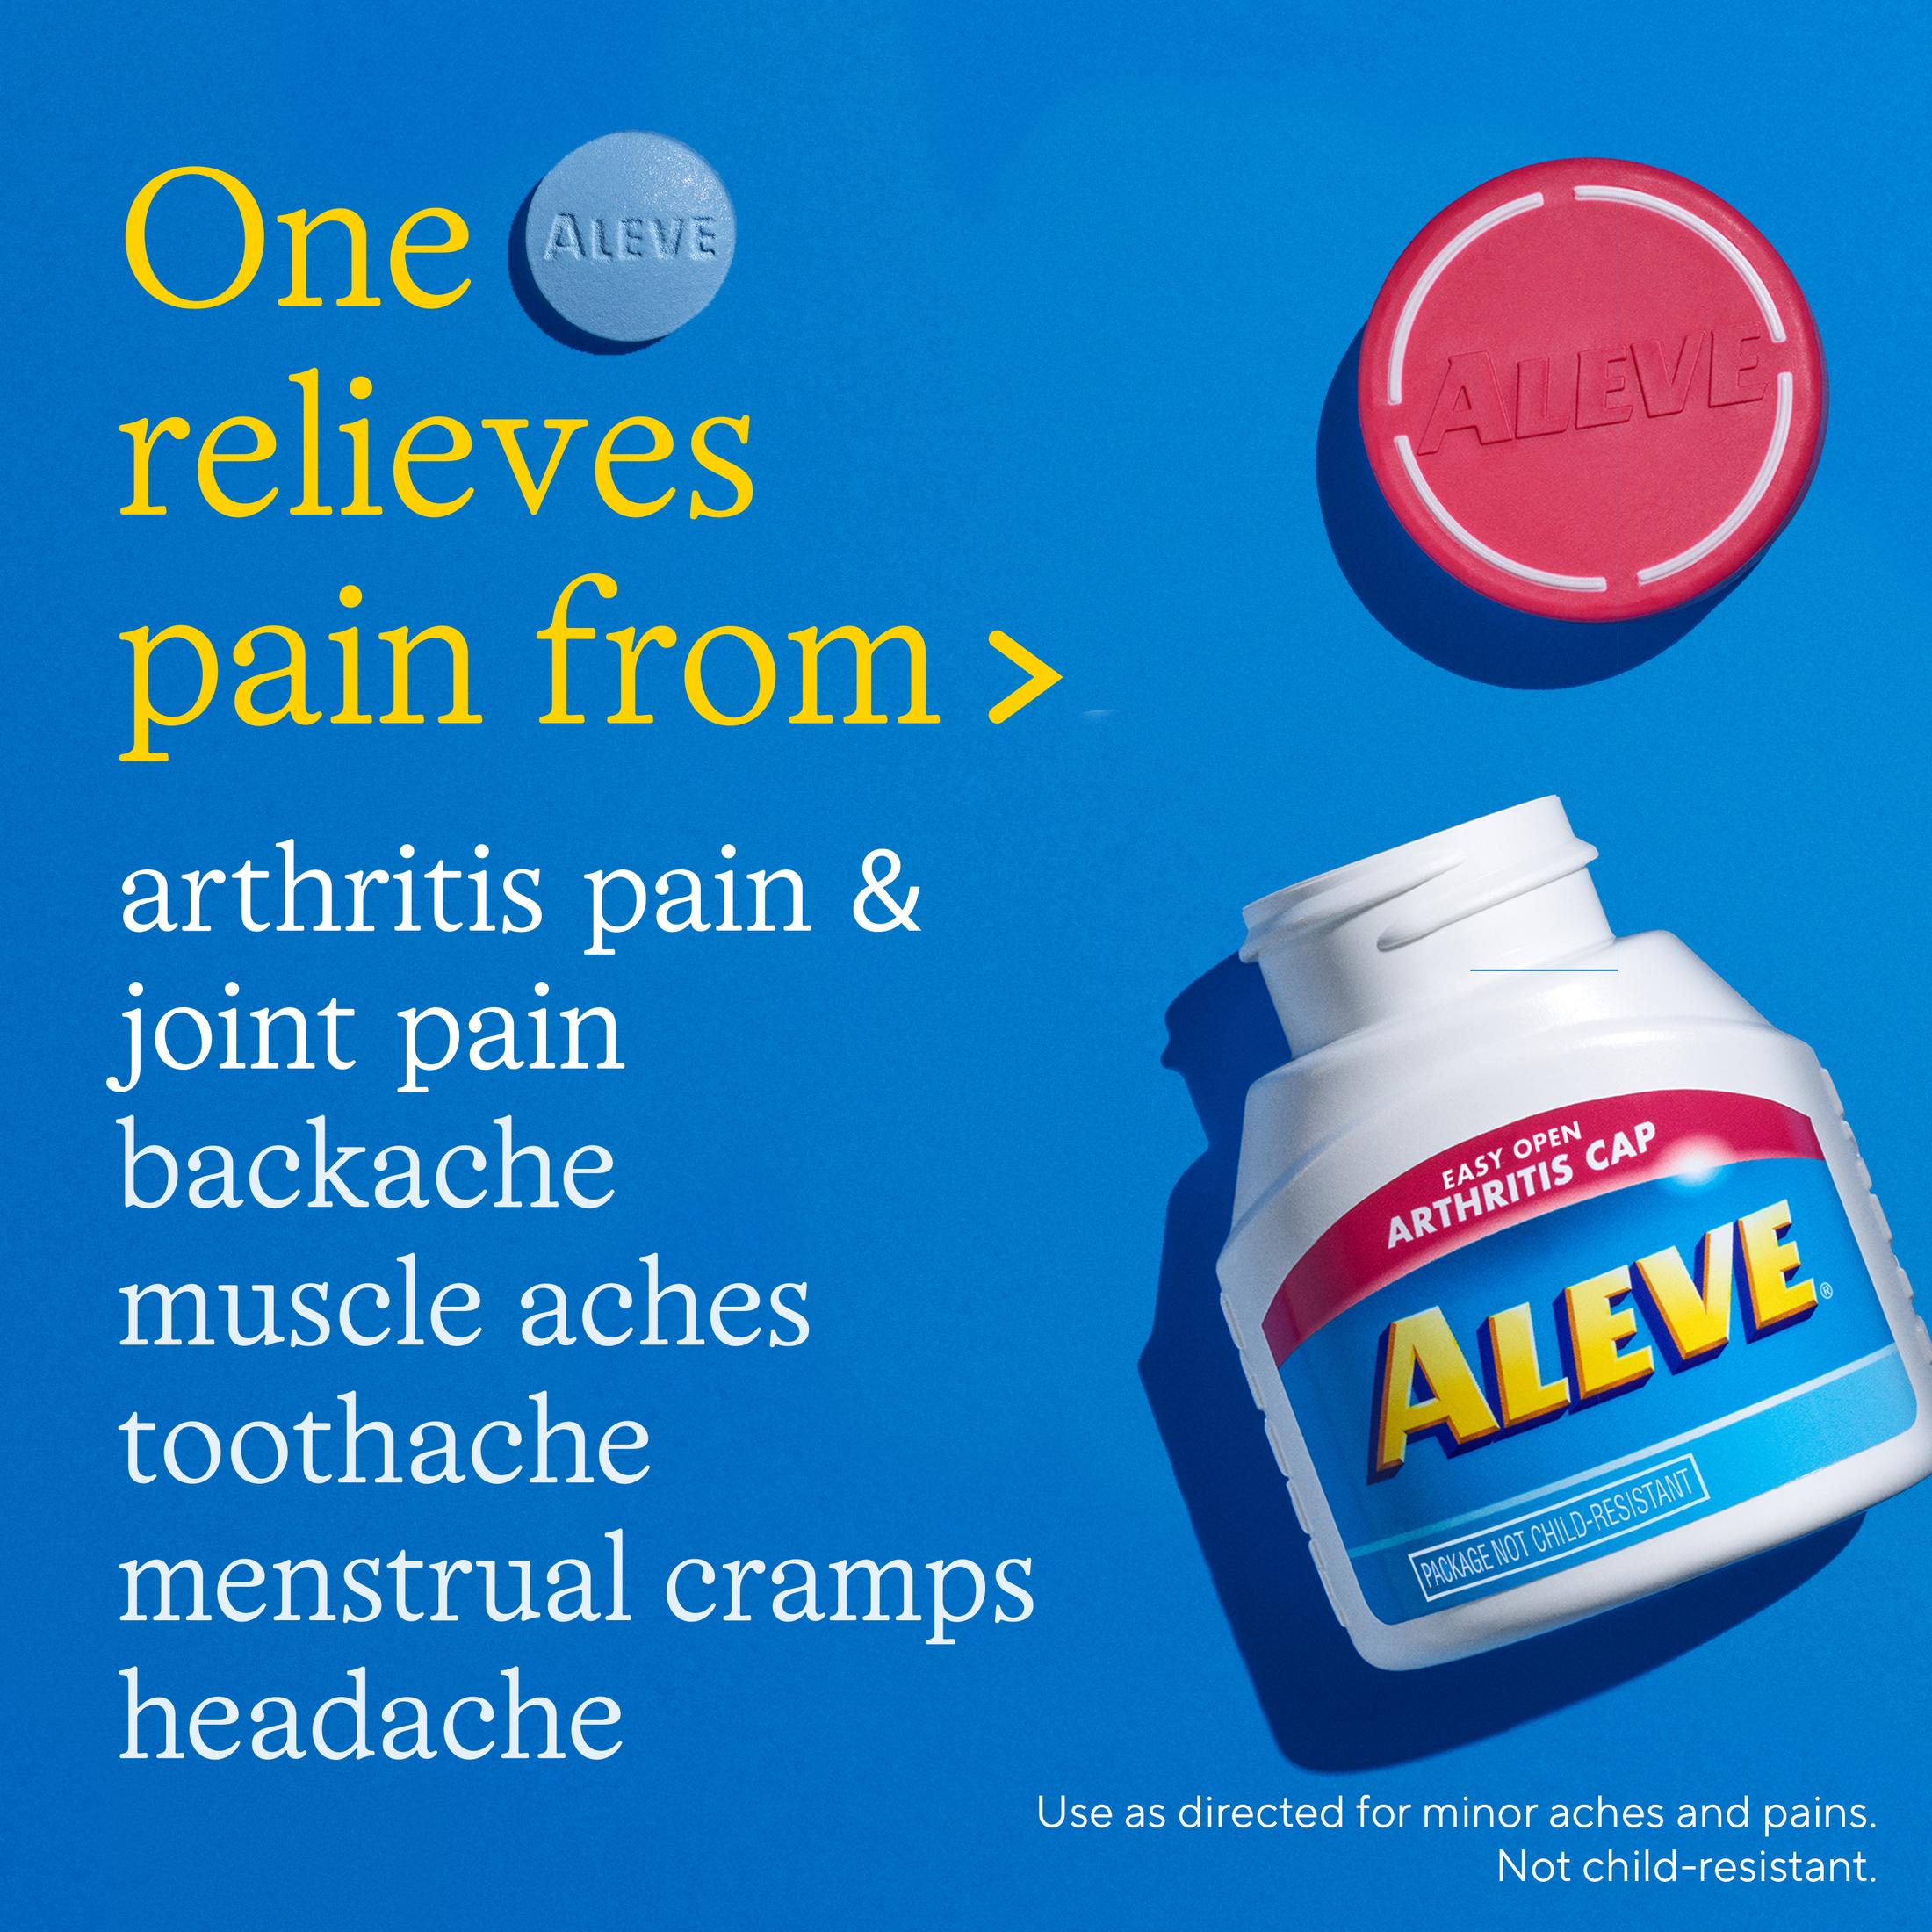 Aleve Tablets Easy Open Arthritis Cap Naproxen Sodium Pain Reliever, 200 Count - image 5 of 14